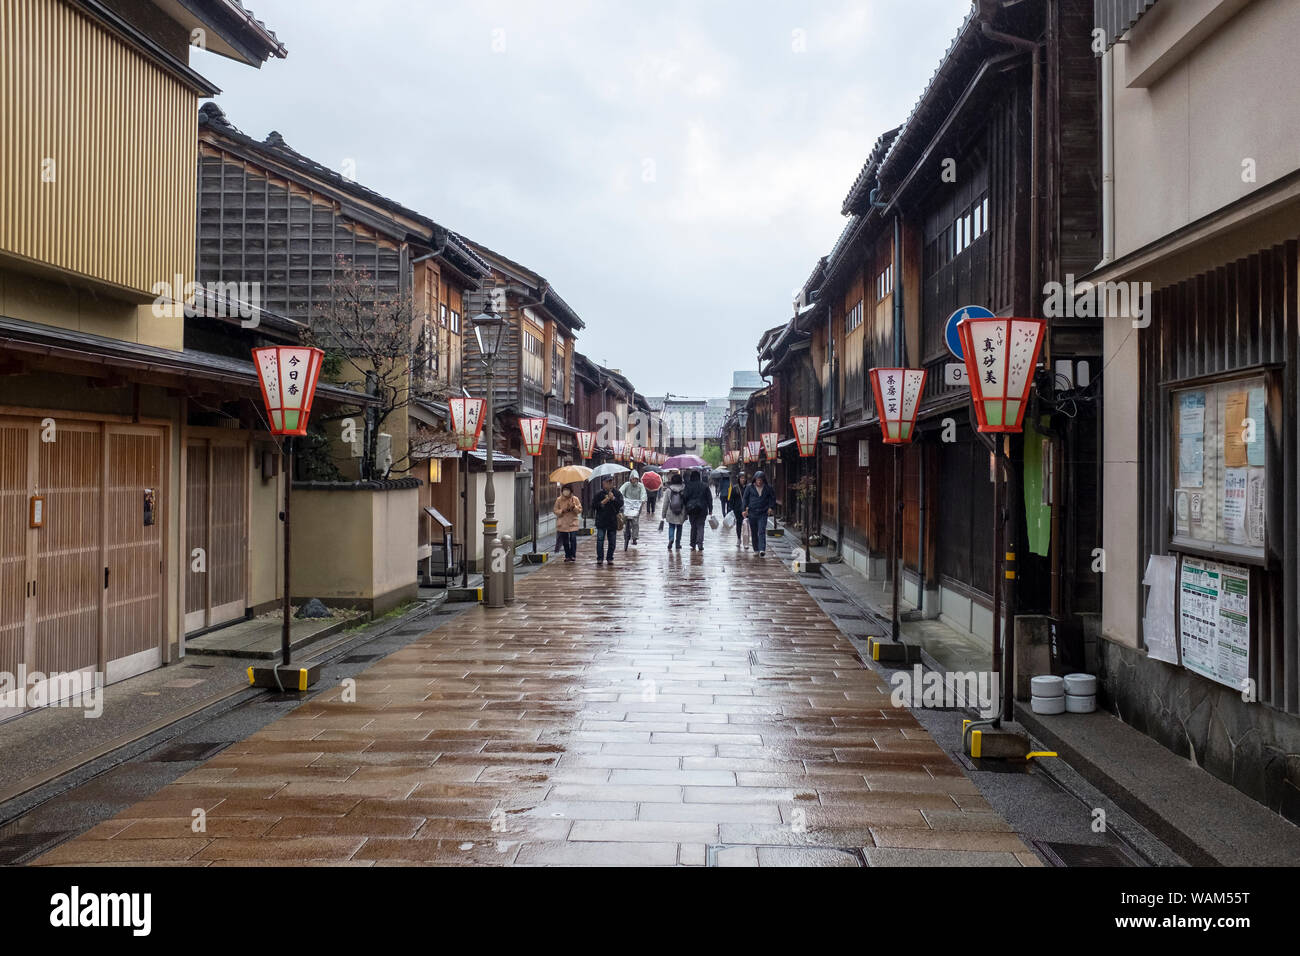 Tourists walking with umbrellas in the rain past traditional teahouses and buildings in the Higashi Chaya geisha district, Kanazawa, Japan Stock Photo